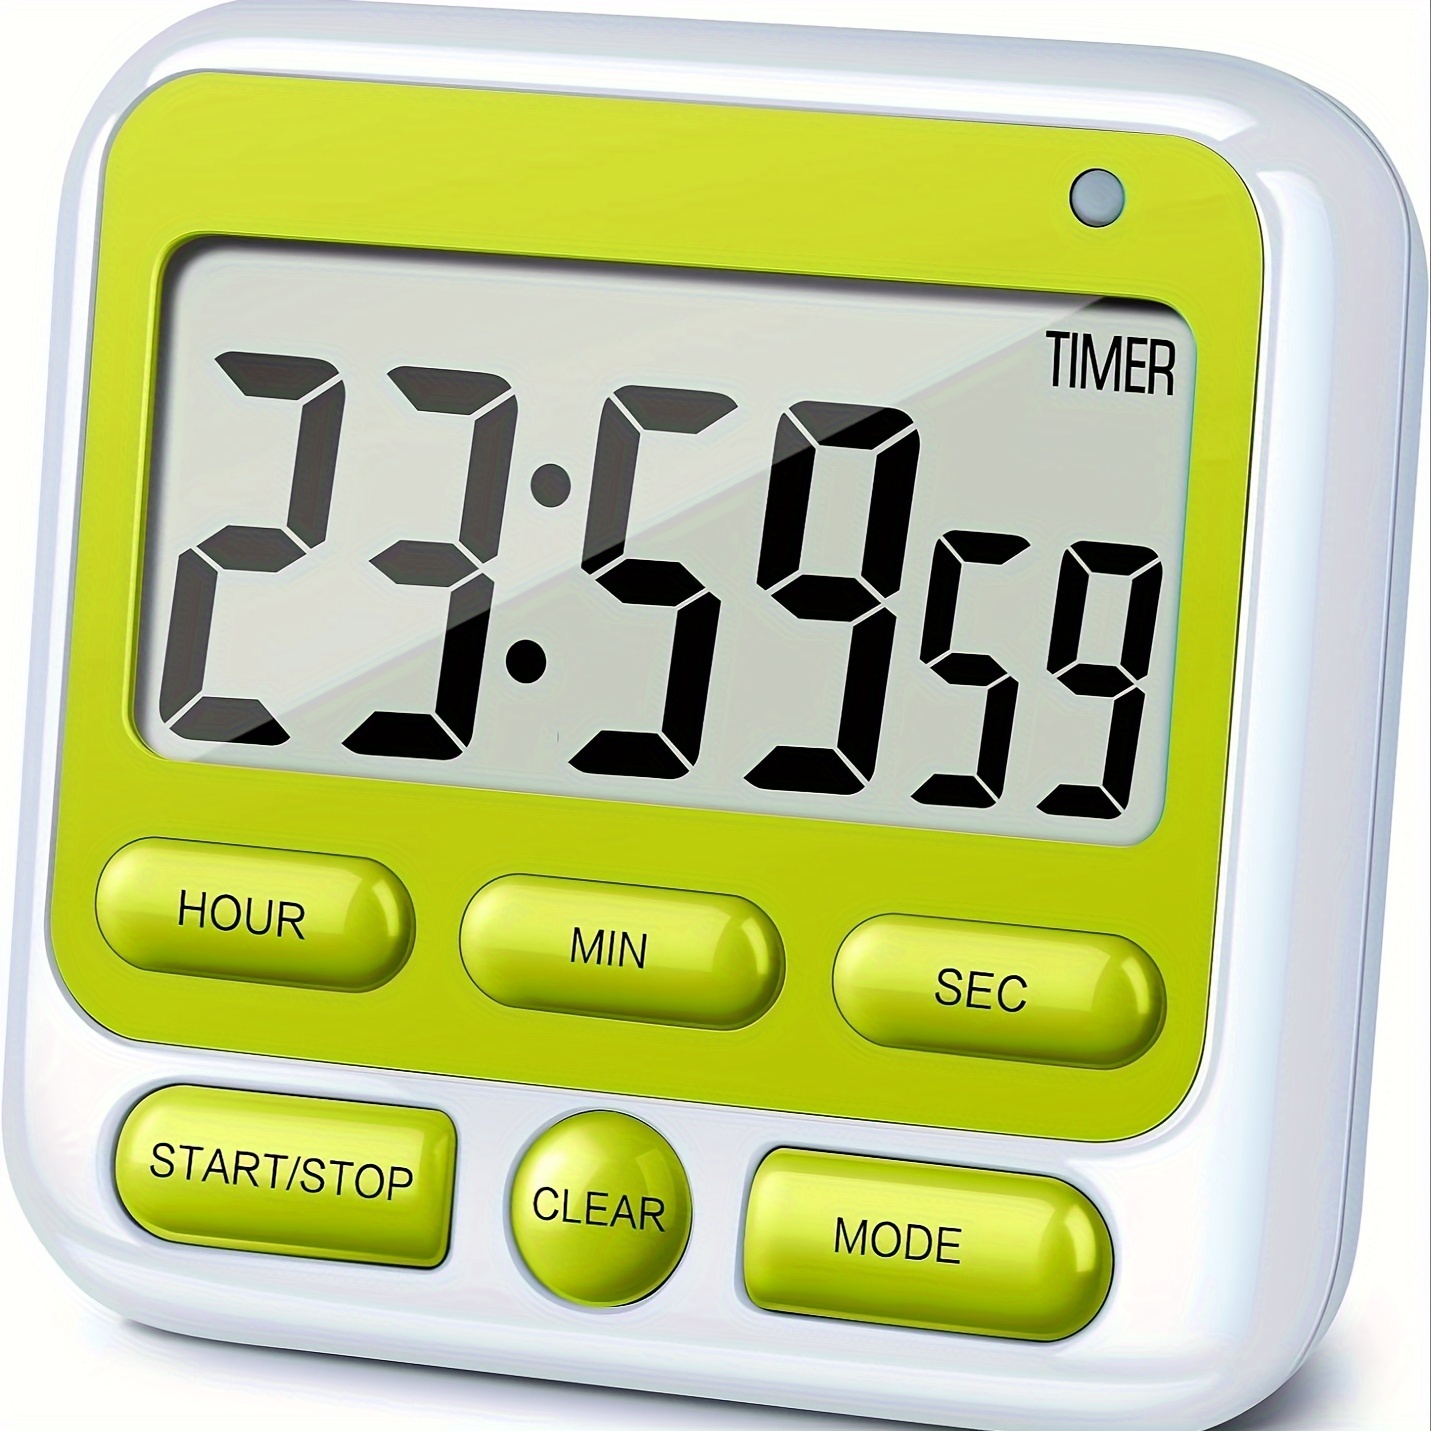 Digital Kitchen Timers Magnetic Countdown Time with Loud Alarm for